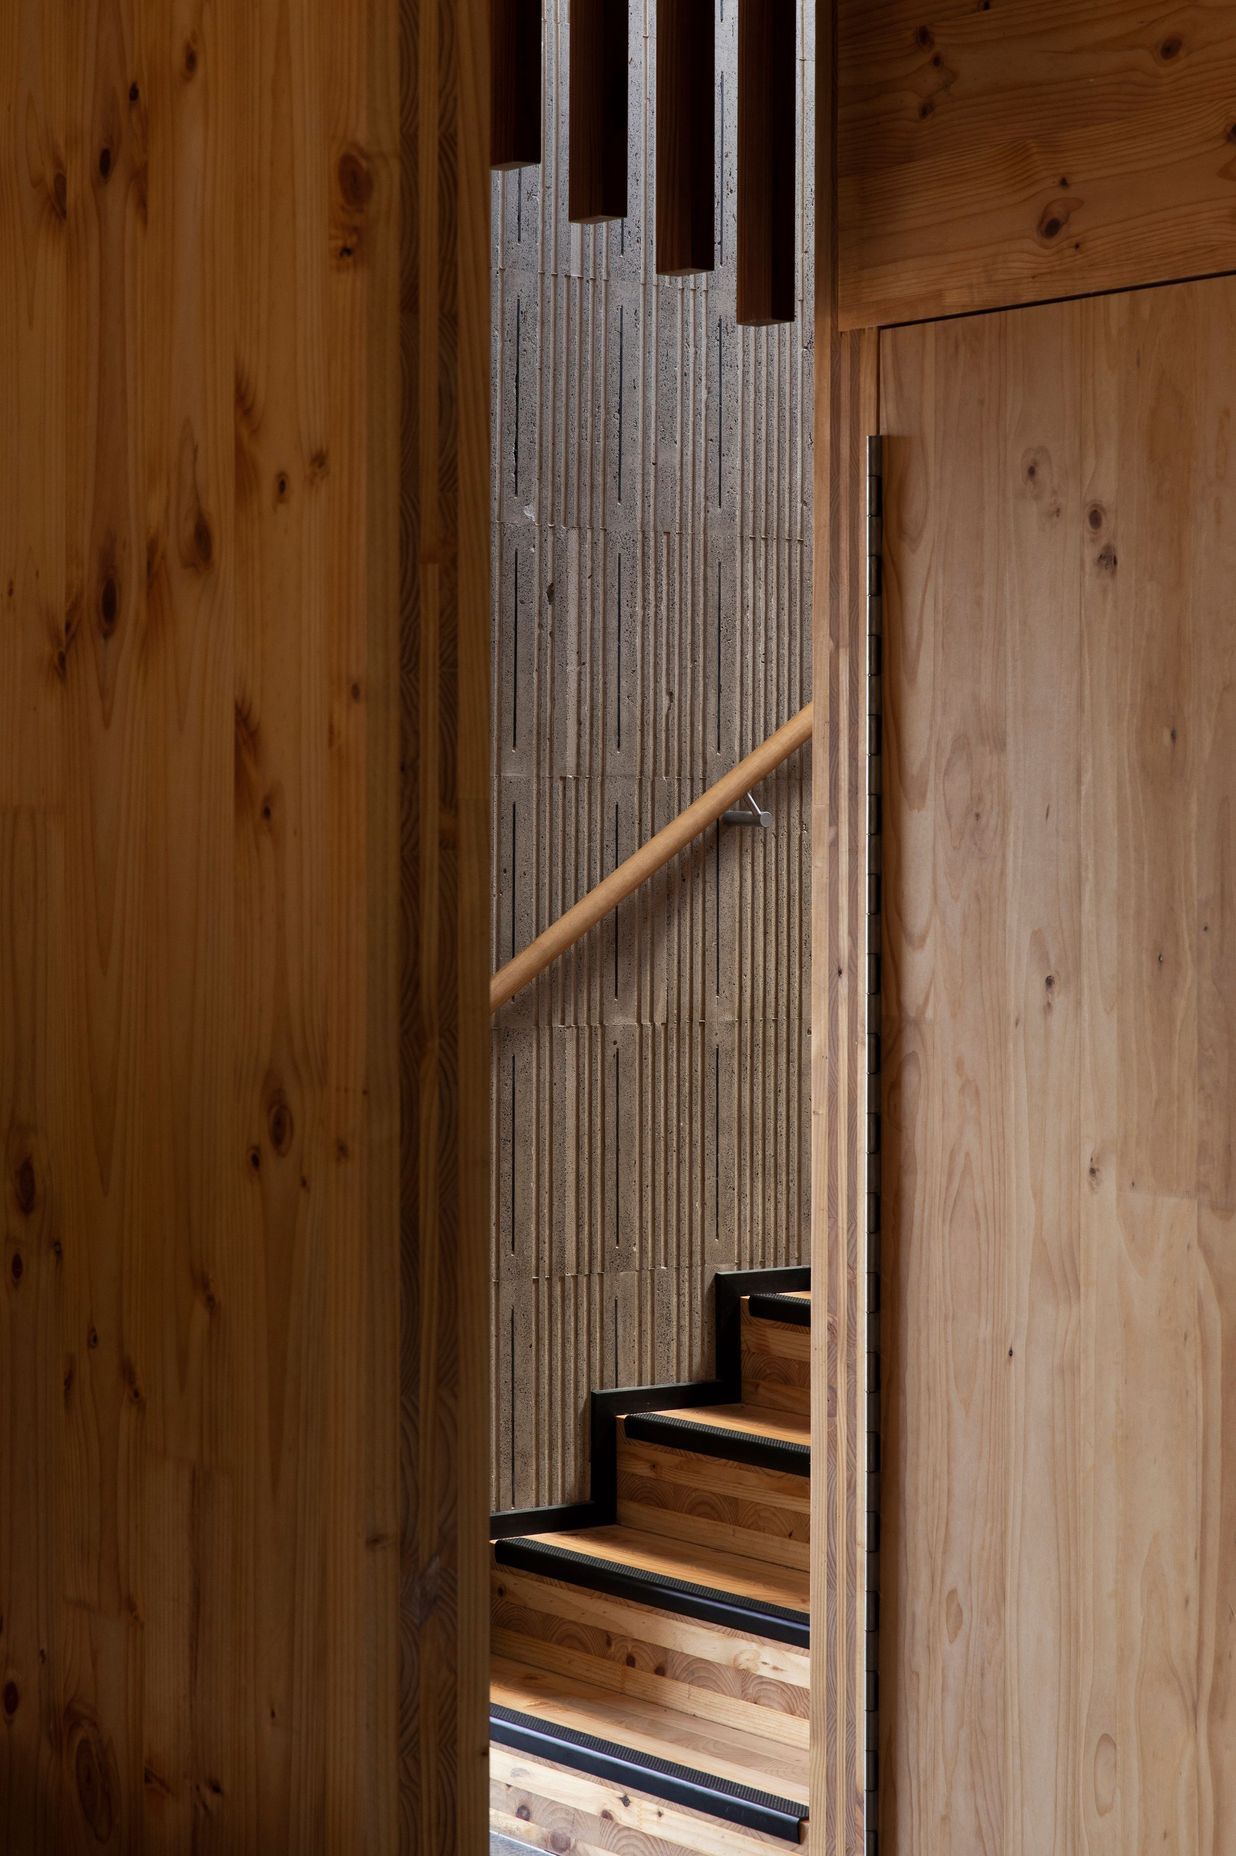 The stairwell to the upper level is constructed from insulated concrete form paneling.